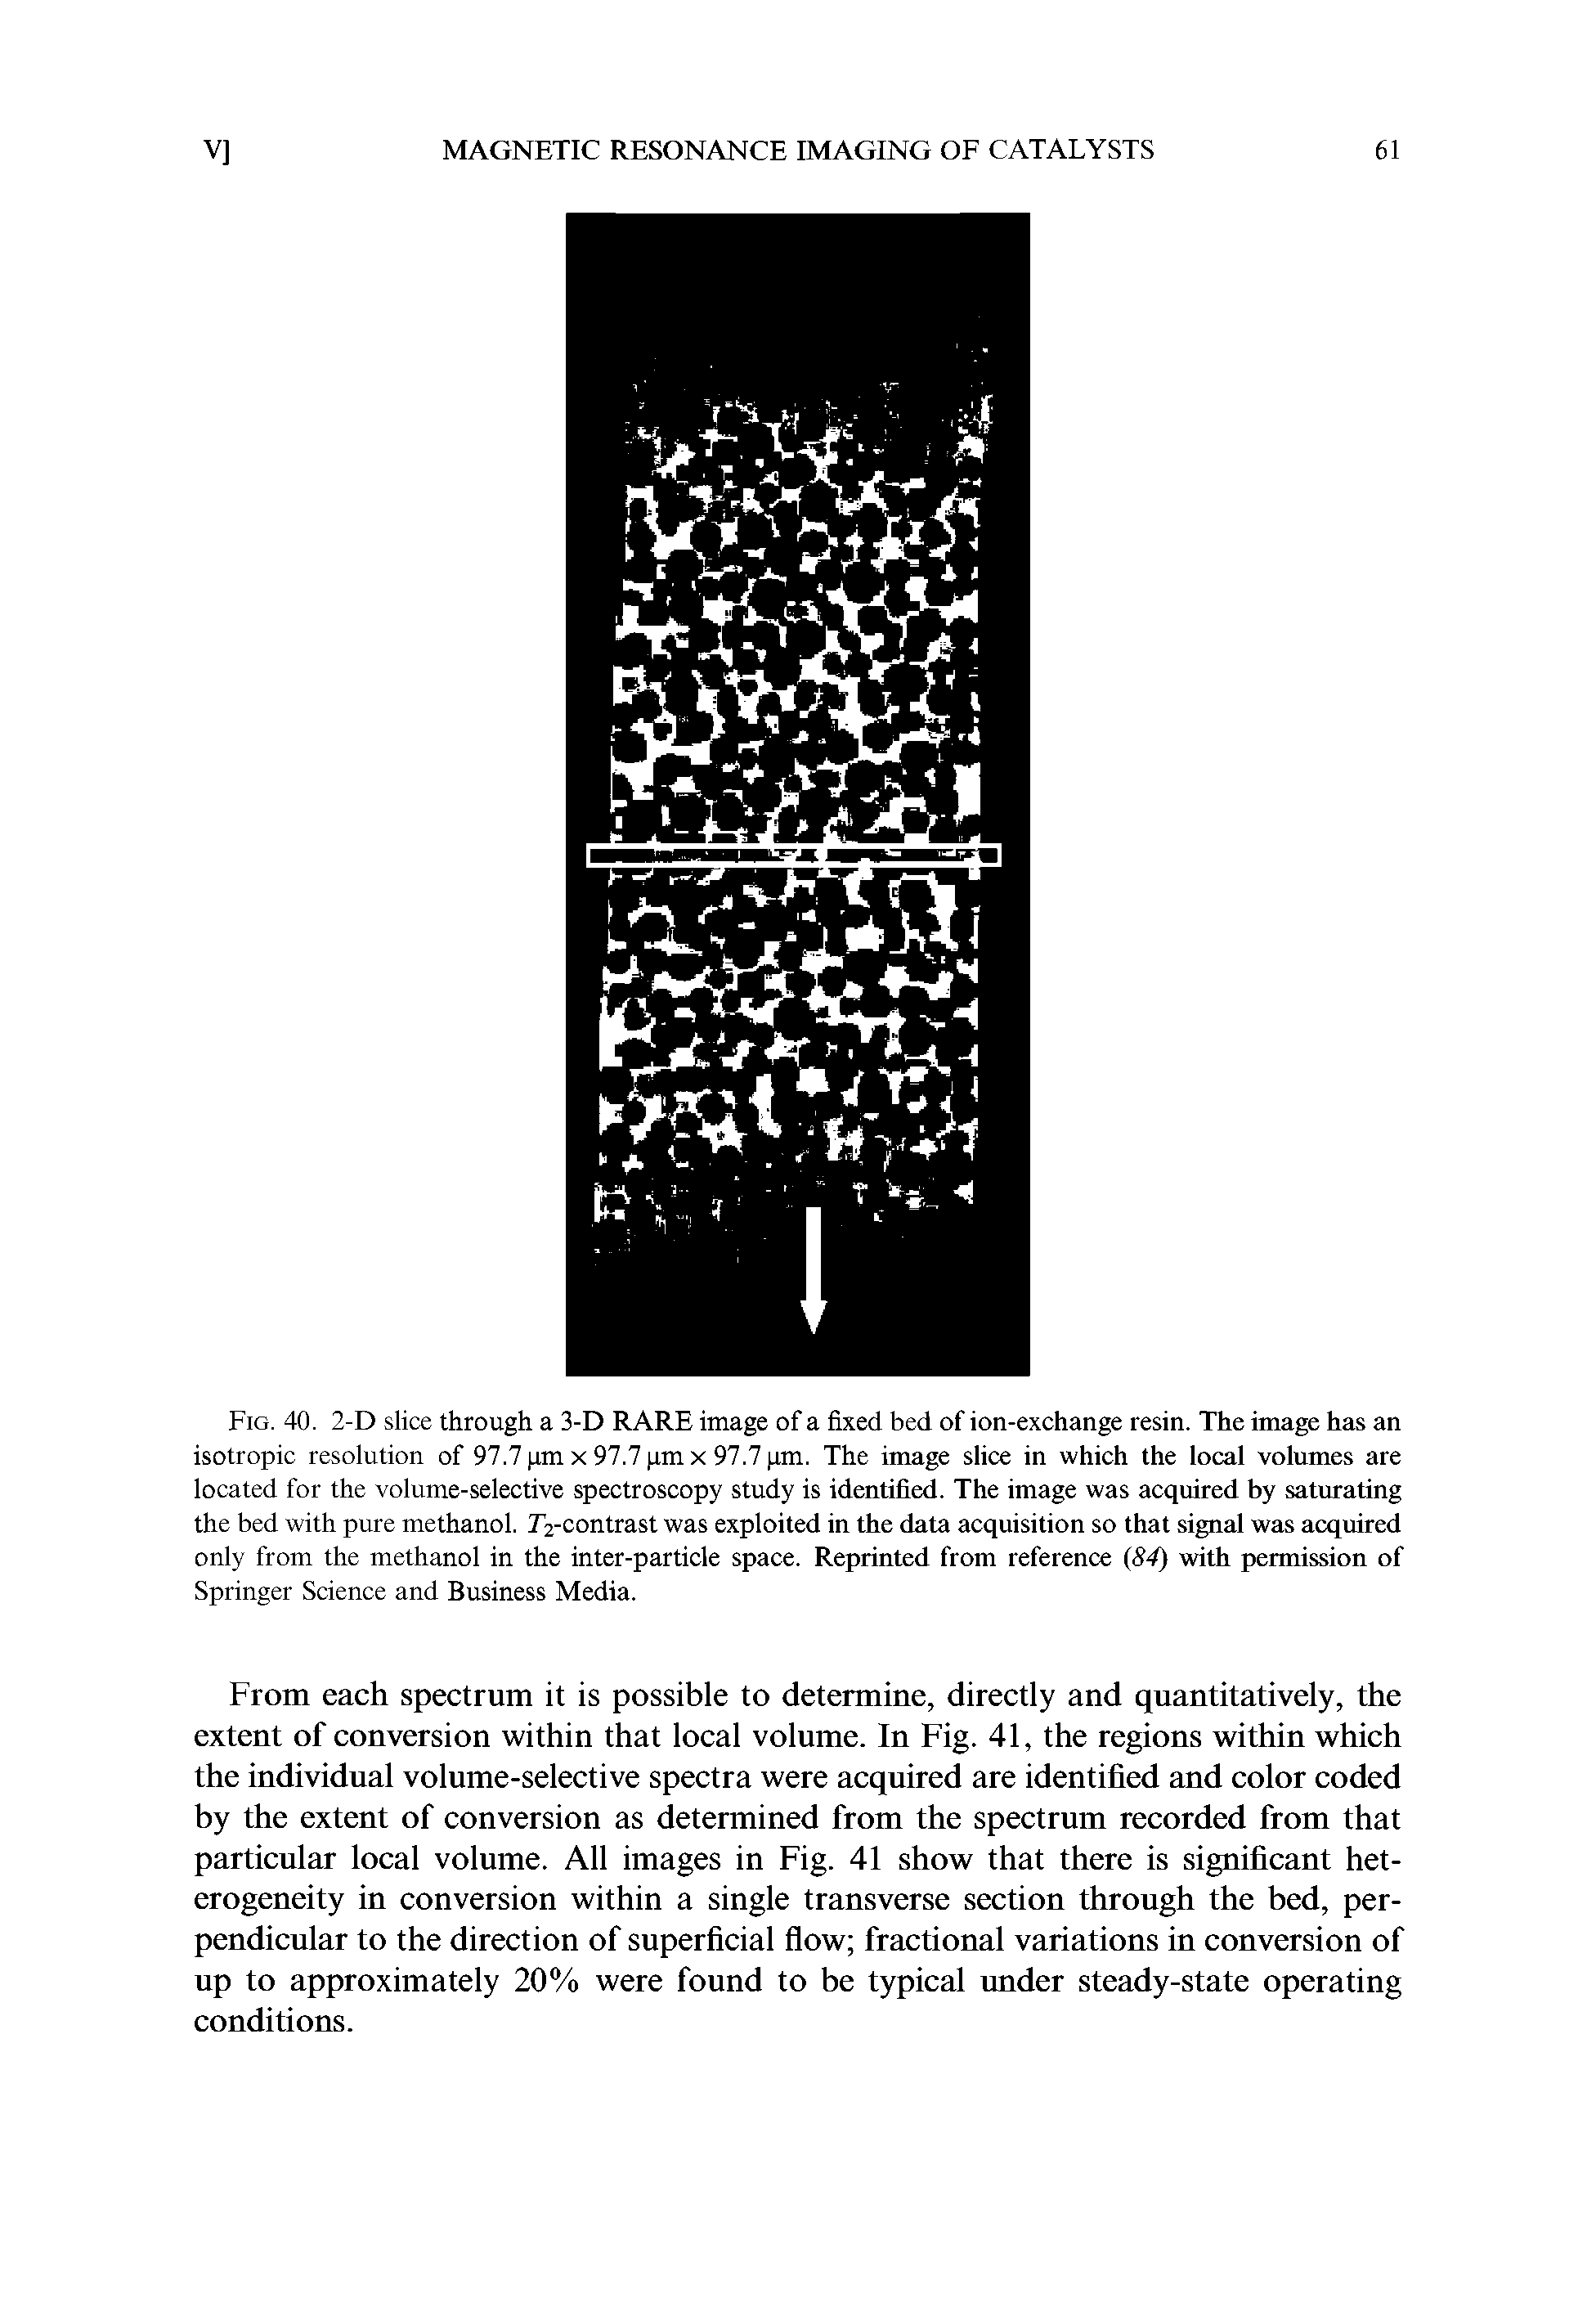 Fig. 40. 2-D slice through a 3-D RARE image of a fixed bed of ion-exchange resin. The image has an isotropic resolution of 97.7 pm x 97.7 pm x 97.7 pm. The image slice in which the local volumes are located for the volume-selective spectroscopy study is identified. The image was acquired by saturating the bed with pure methanol. r2-contrast was exploited in the data acquisition so that signal was acquired only from the methanol in the inter-particle space. Reprinted from reference (84 with permission of Springer Science and Business Media.